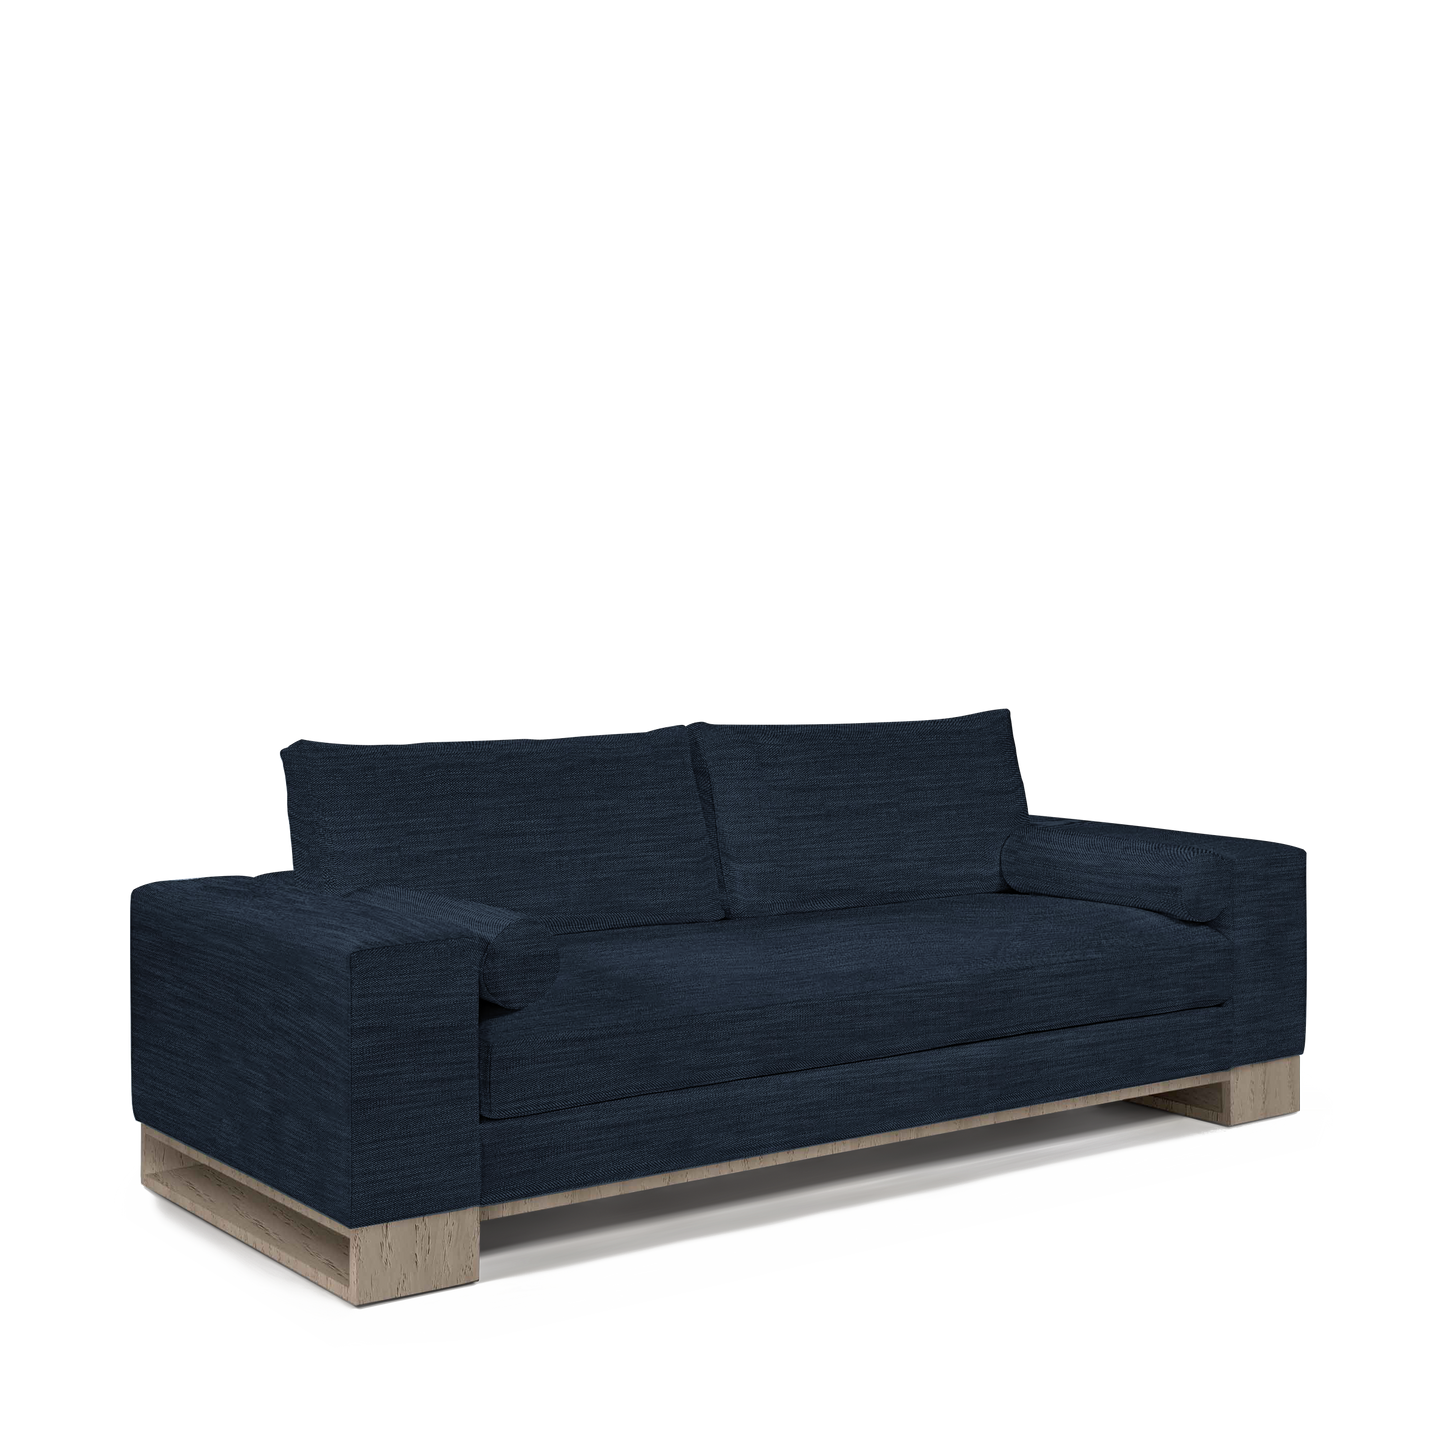 TERRA 2,5-seater sofa with rocco dark blue textile and natural grey wood legs 